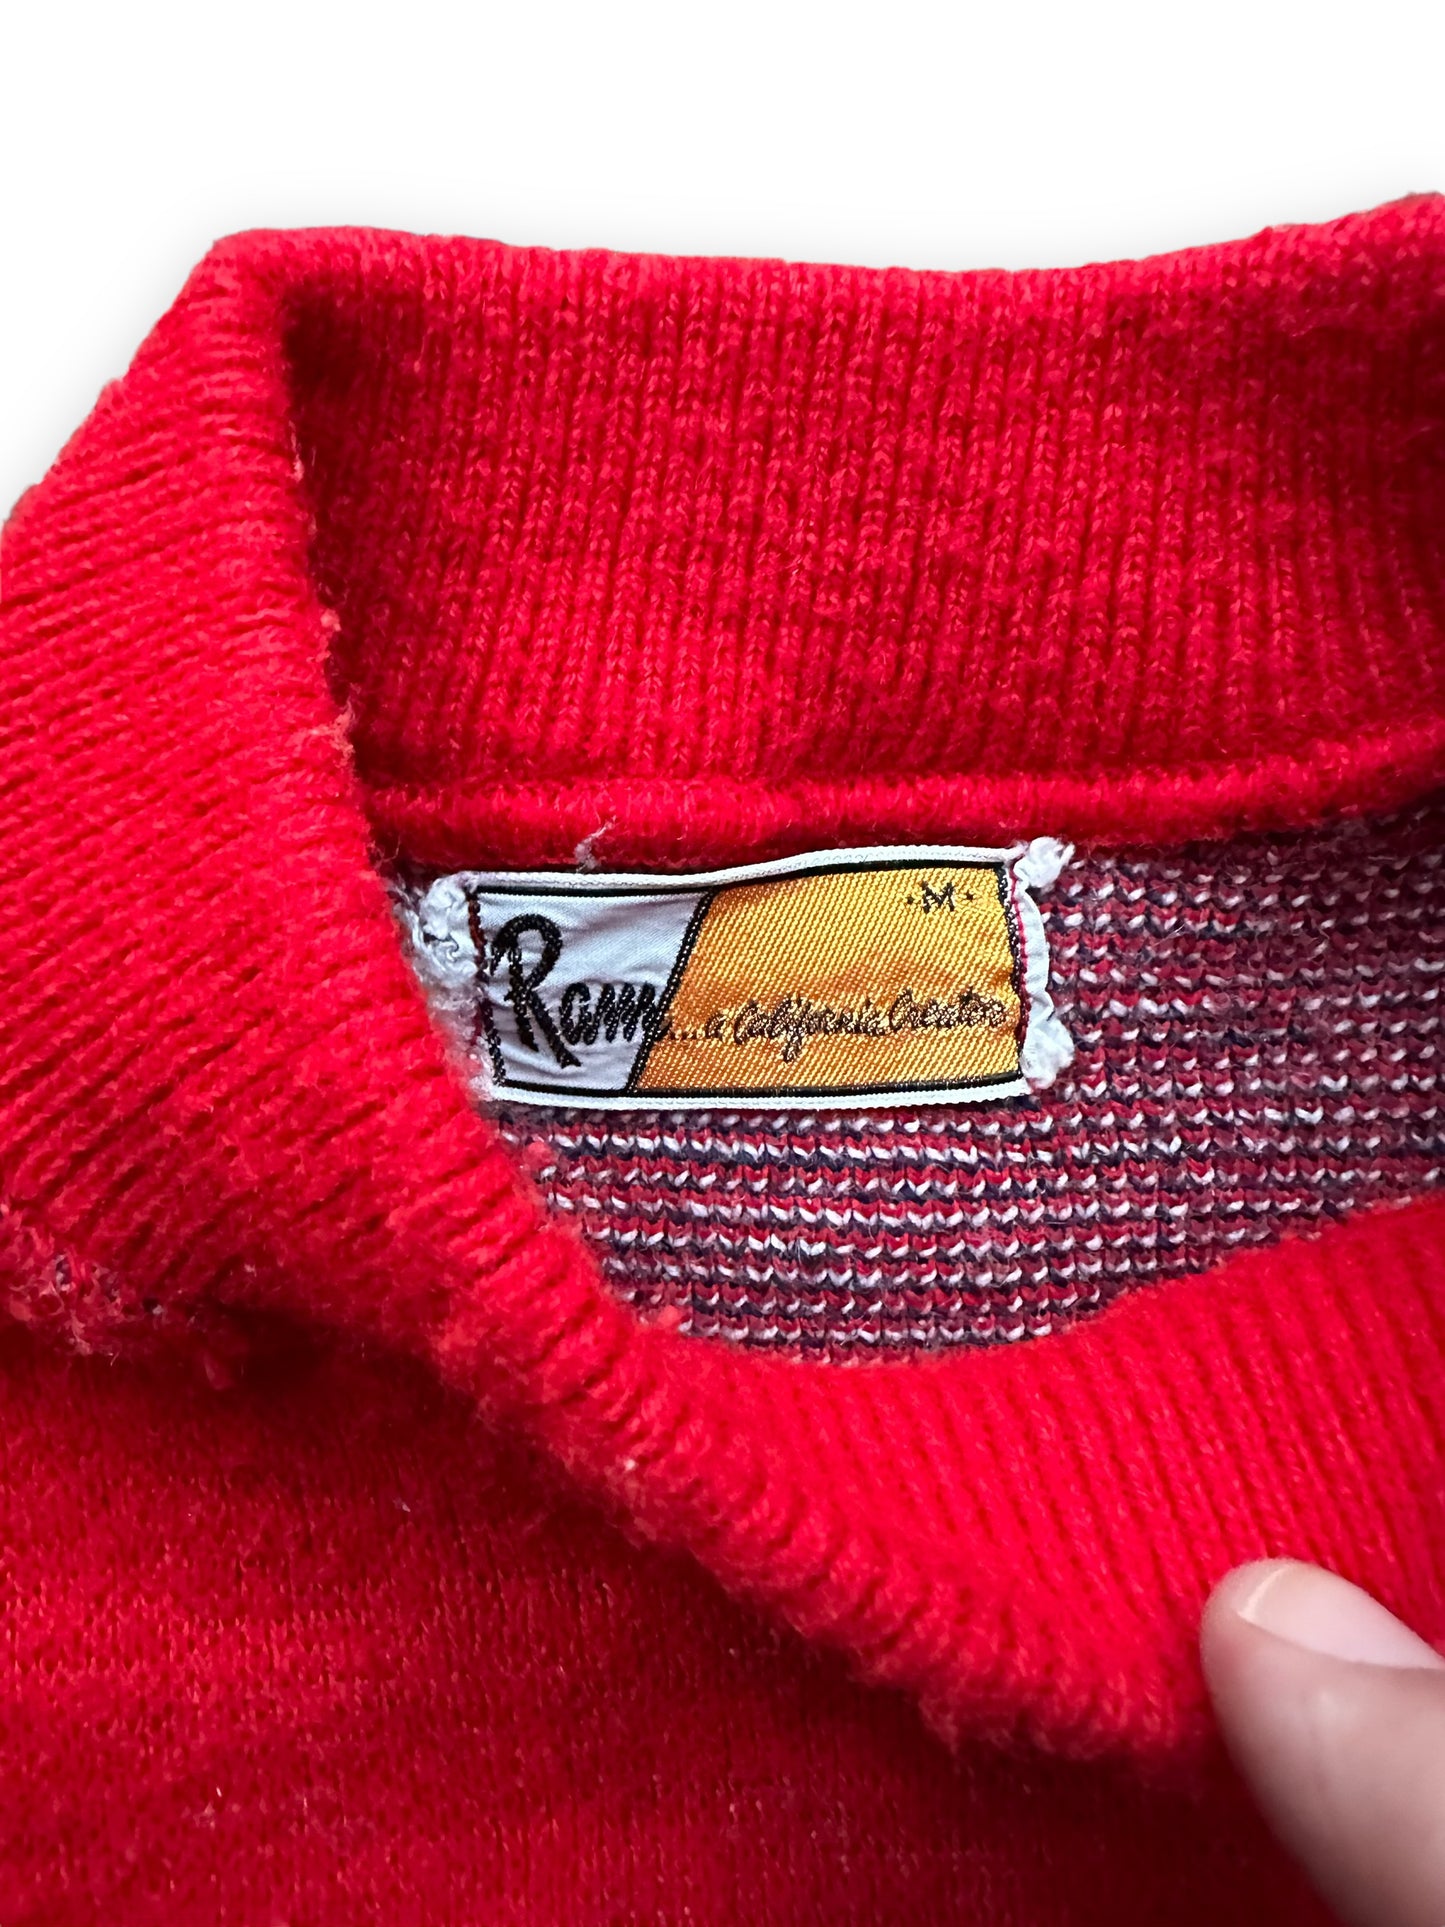 Ram Tag of Vintage Capitol Records Promotional Sweater SZ M |  Vintage Sweaters Seattle | Barn Owl Vintage Seattle